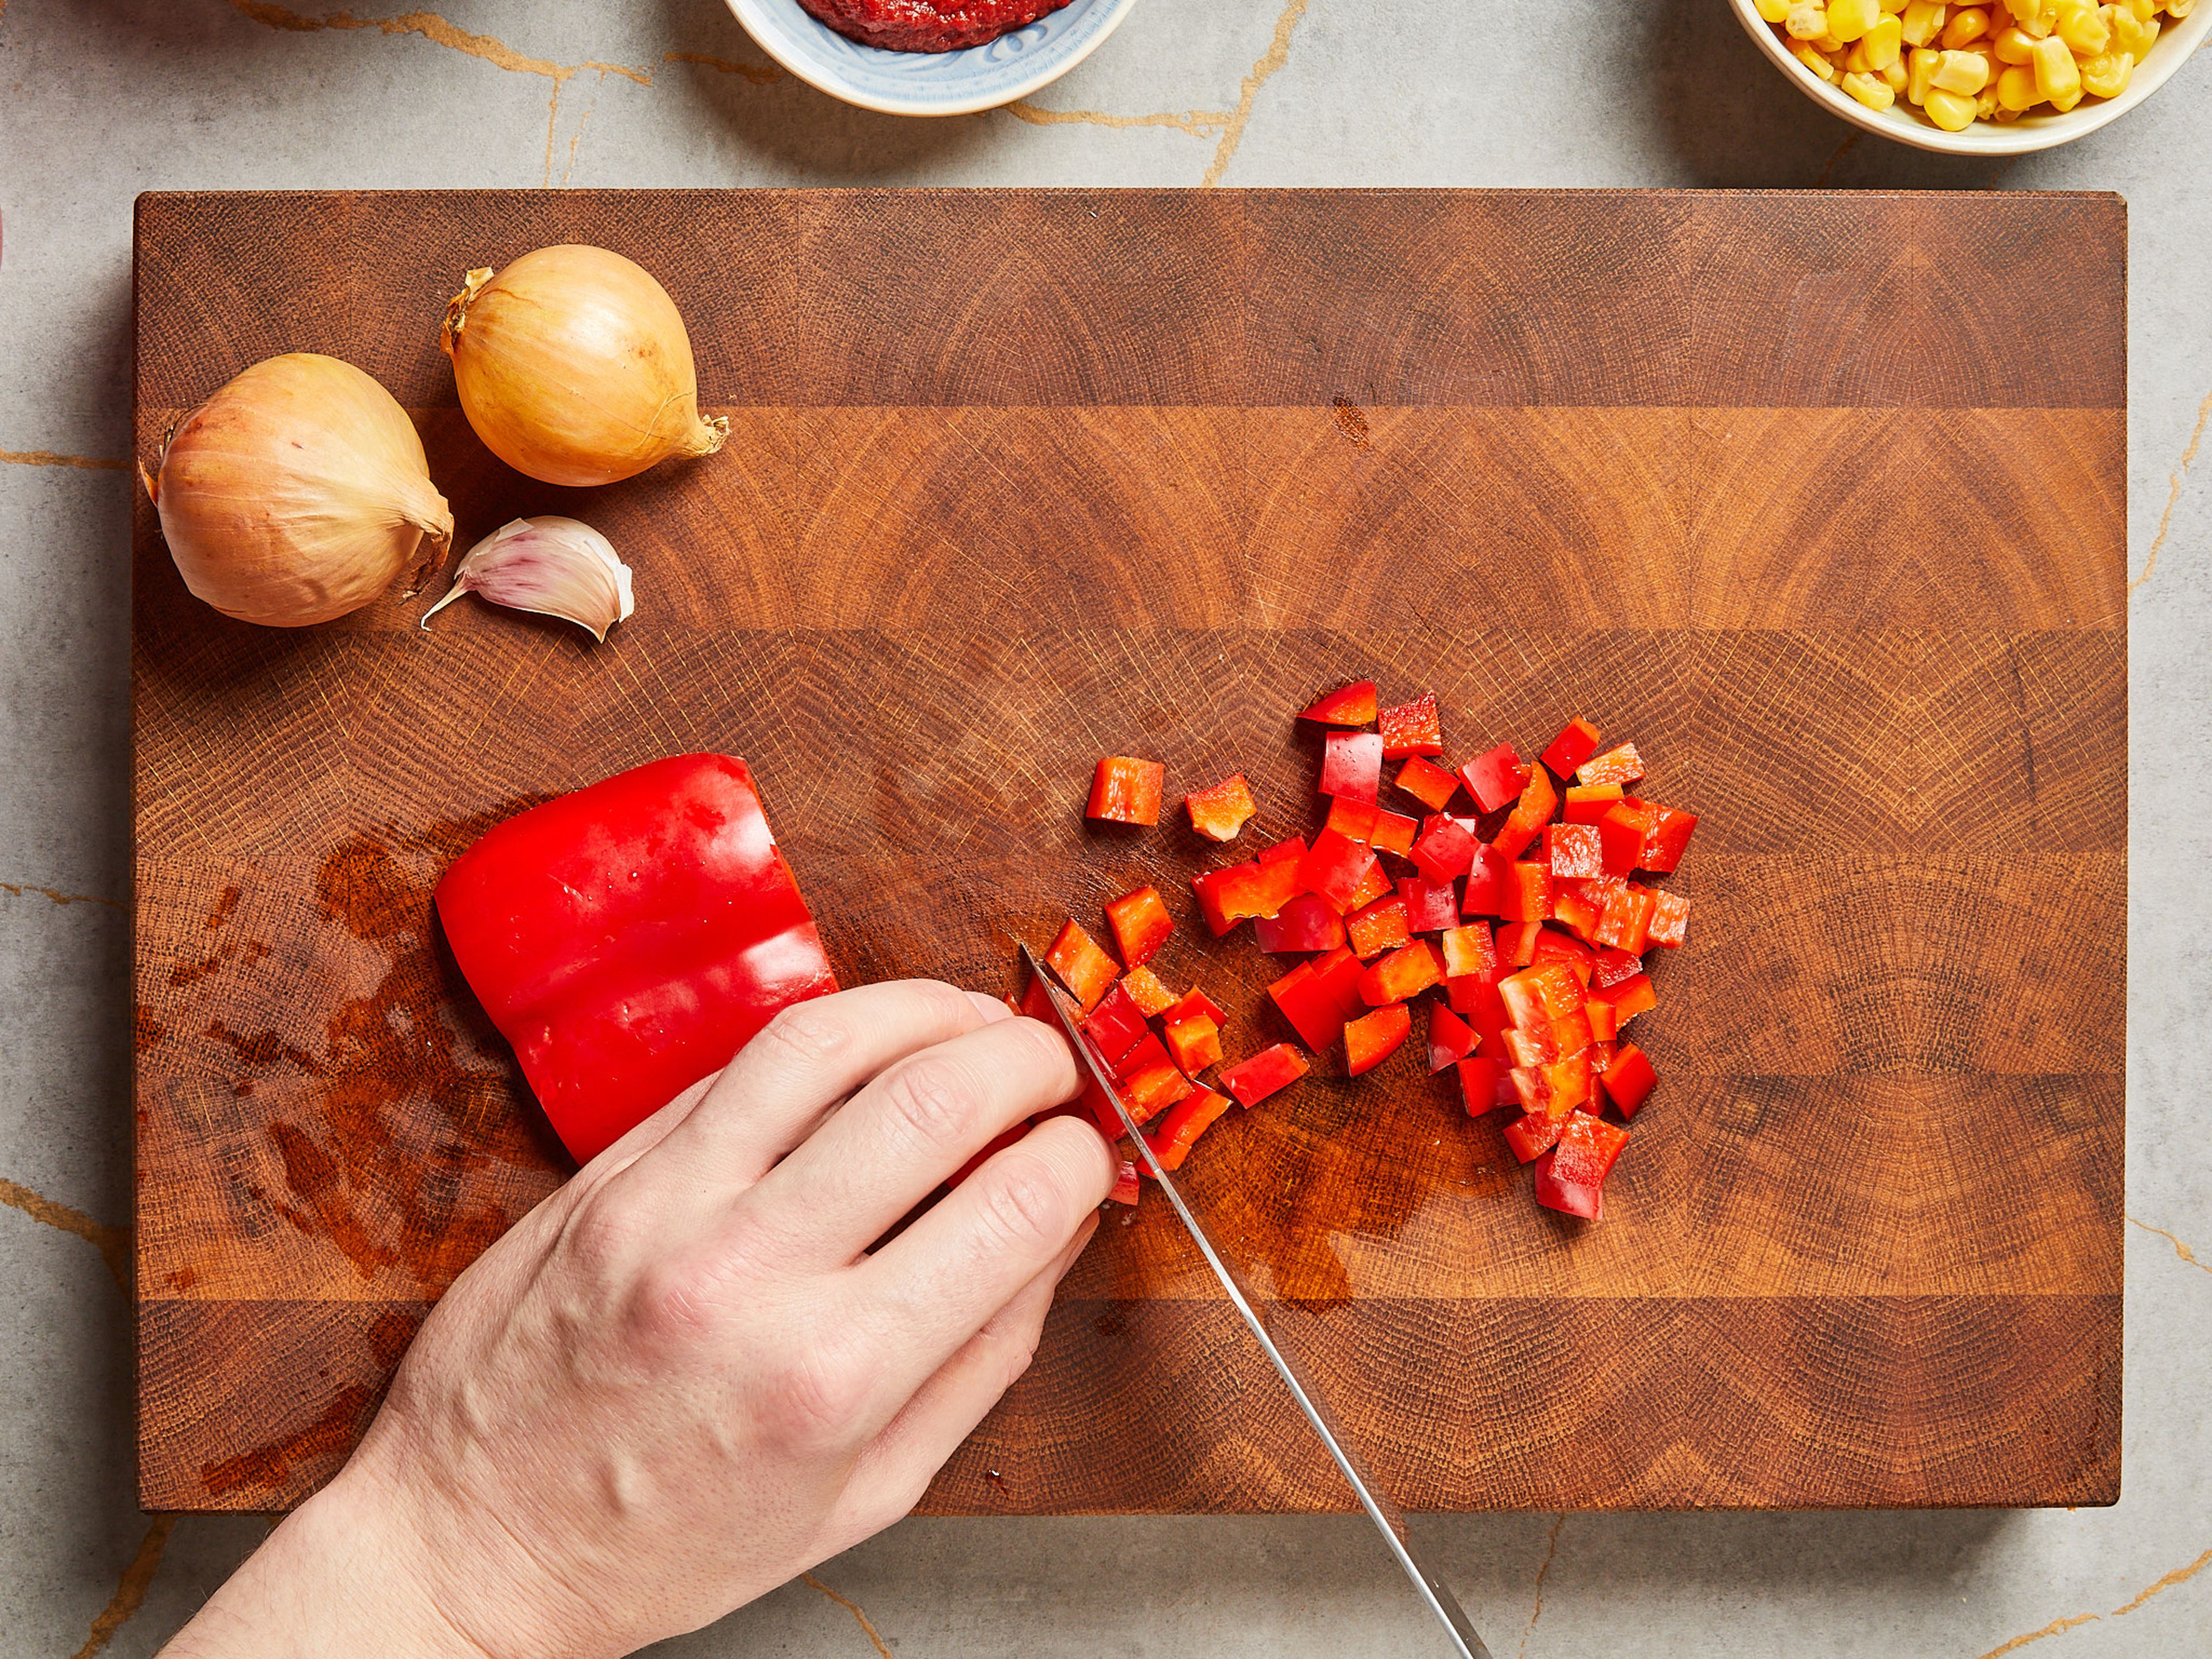 Peel and finely chop onion and garlic. Dice the red bell pepper. Halve the chili, remove the seeds, and finely chop.